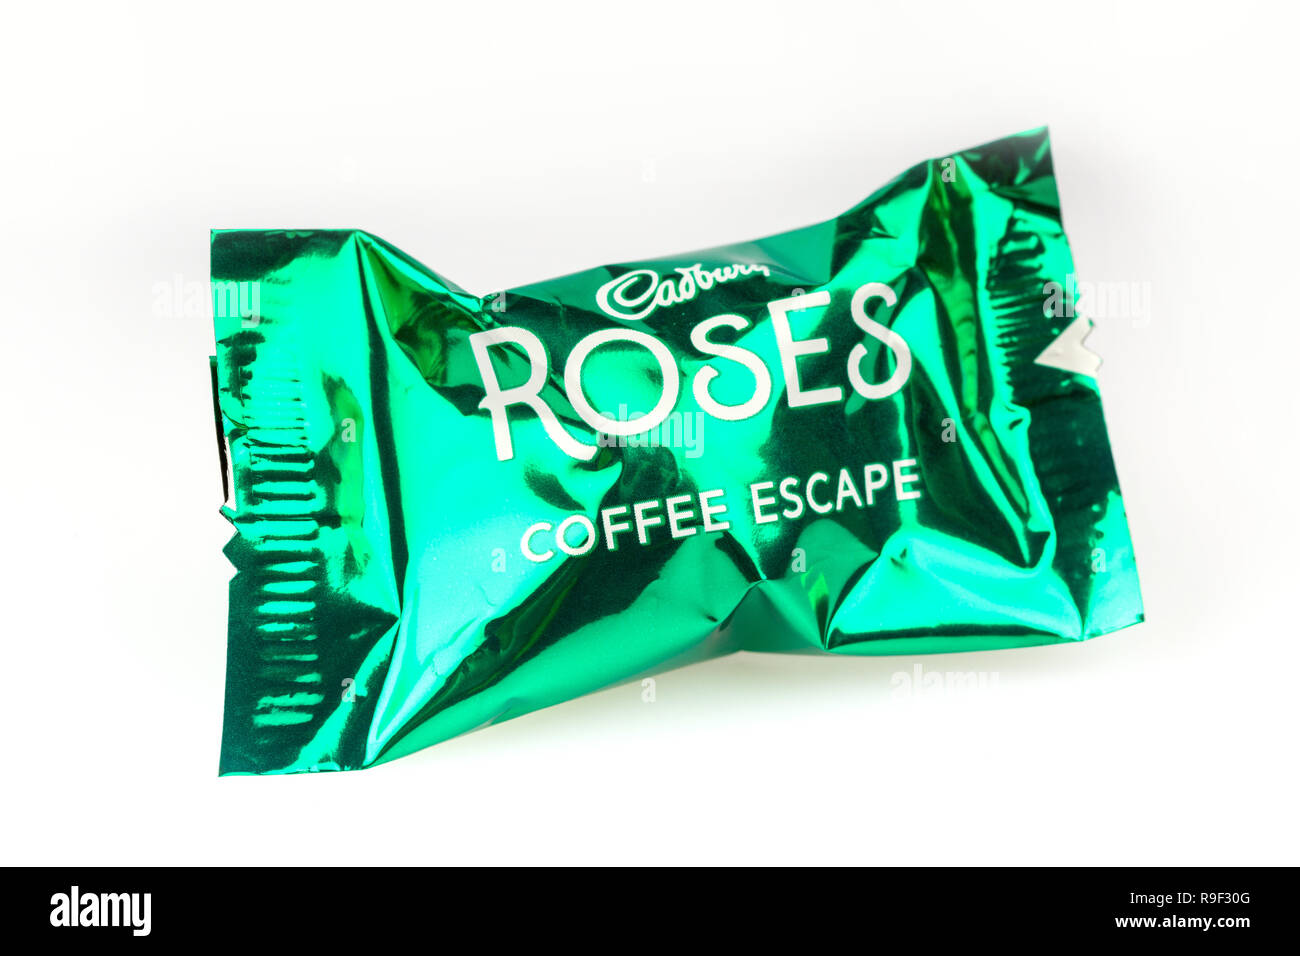 Coffee Escape cadbury's Roses chocolate on a white background Stock Photo